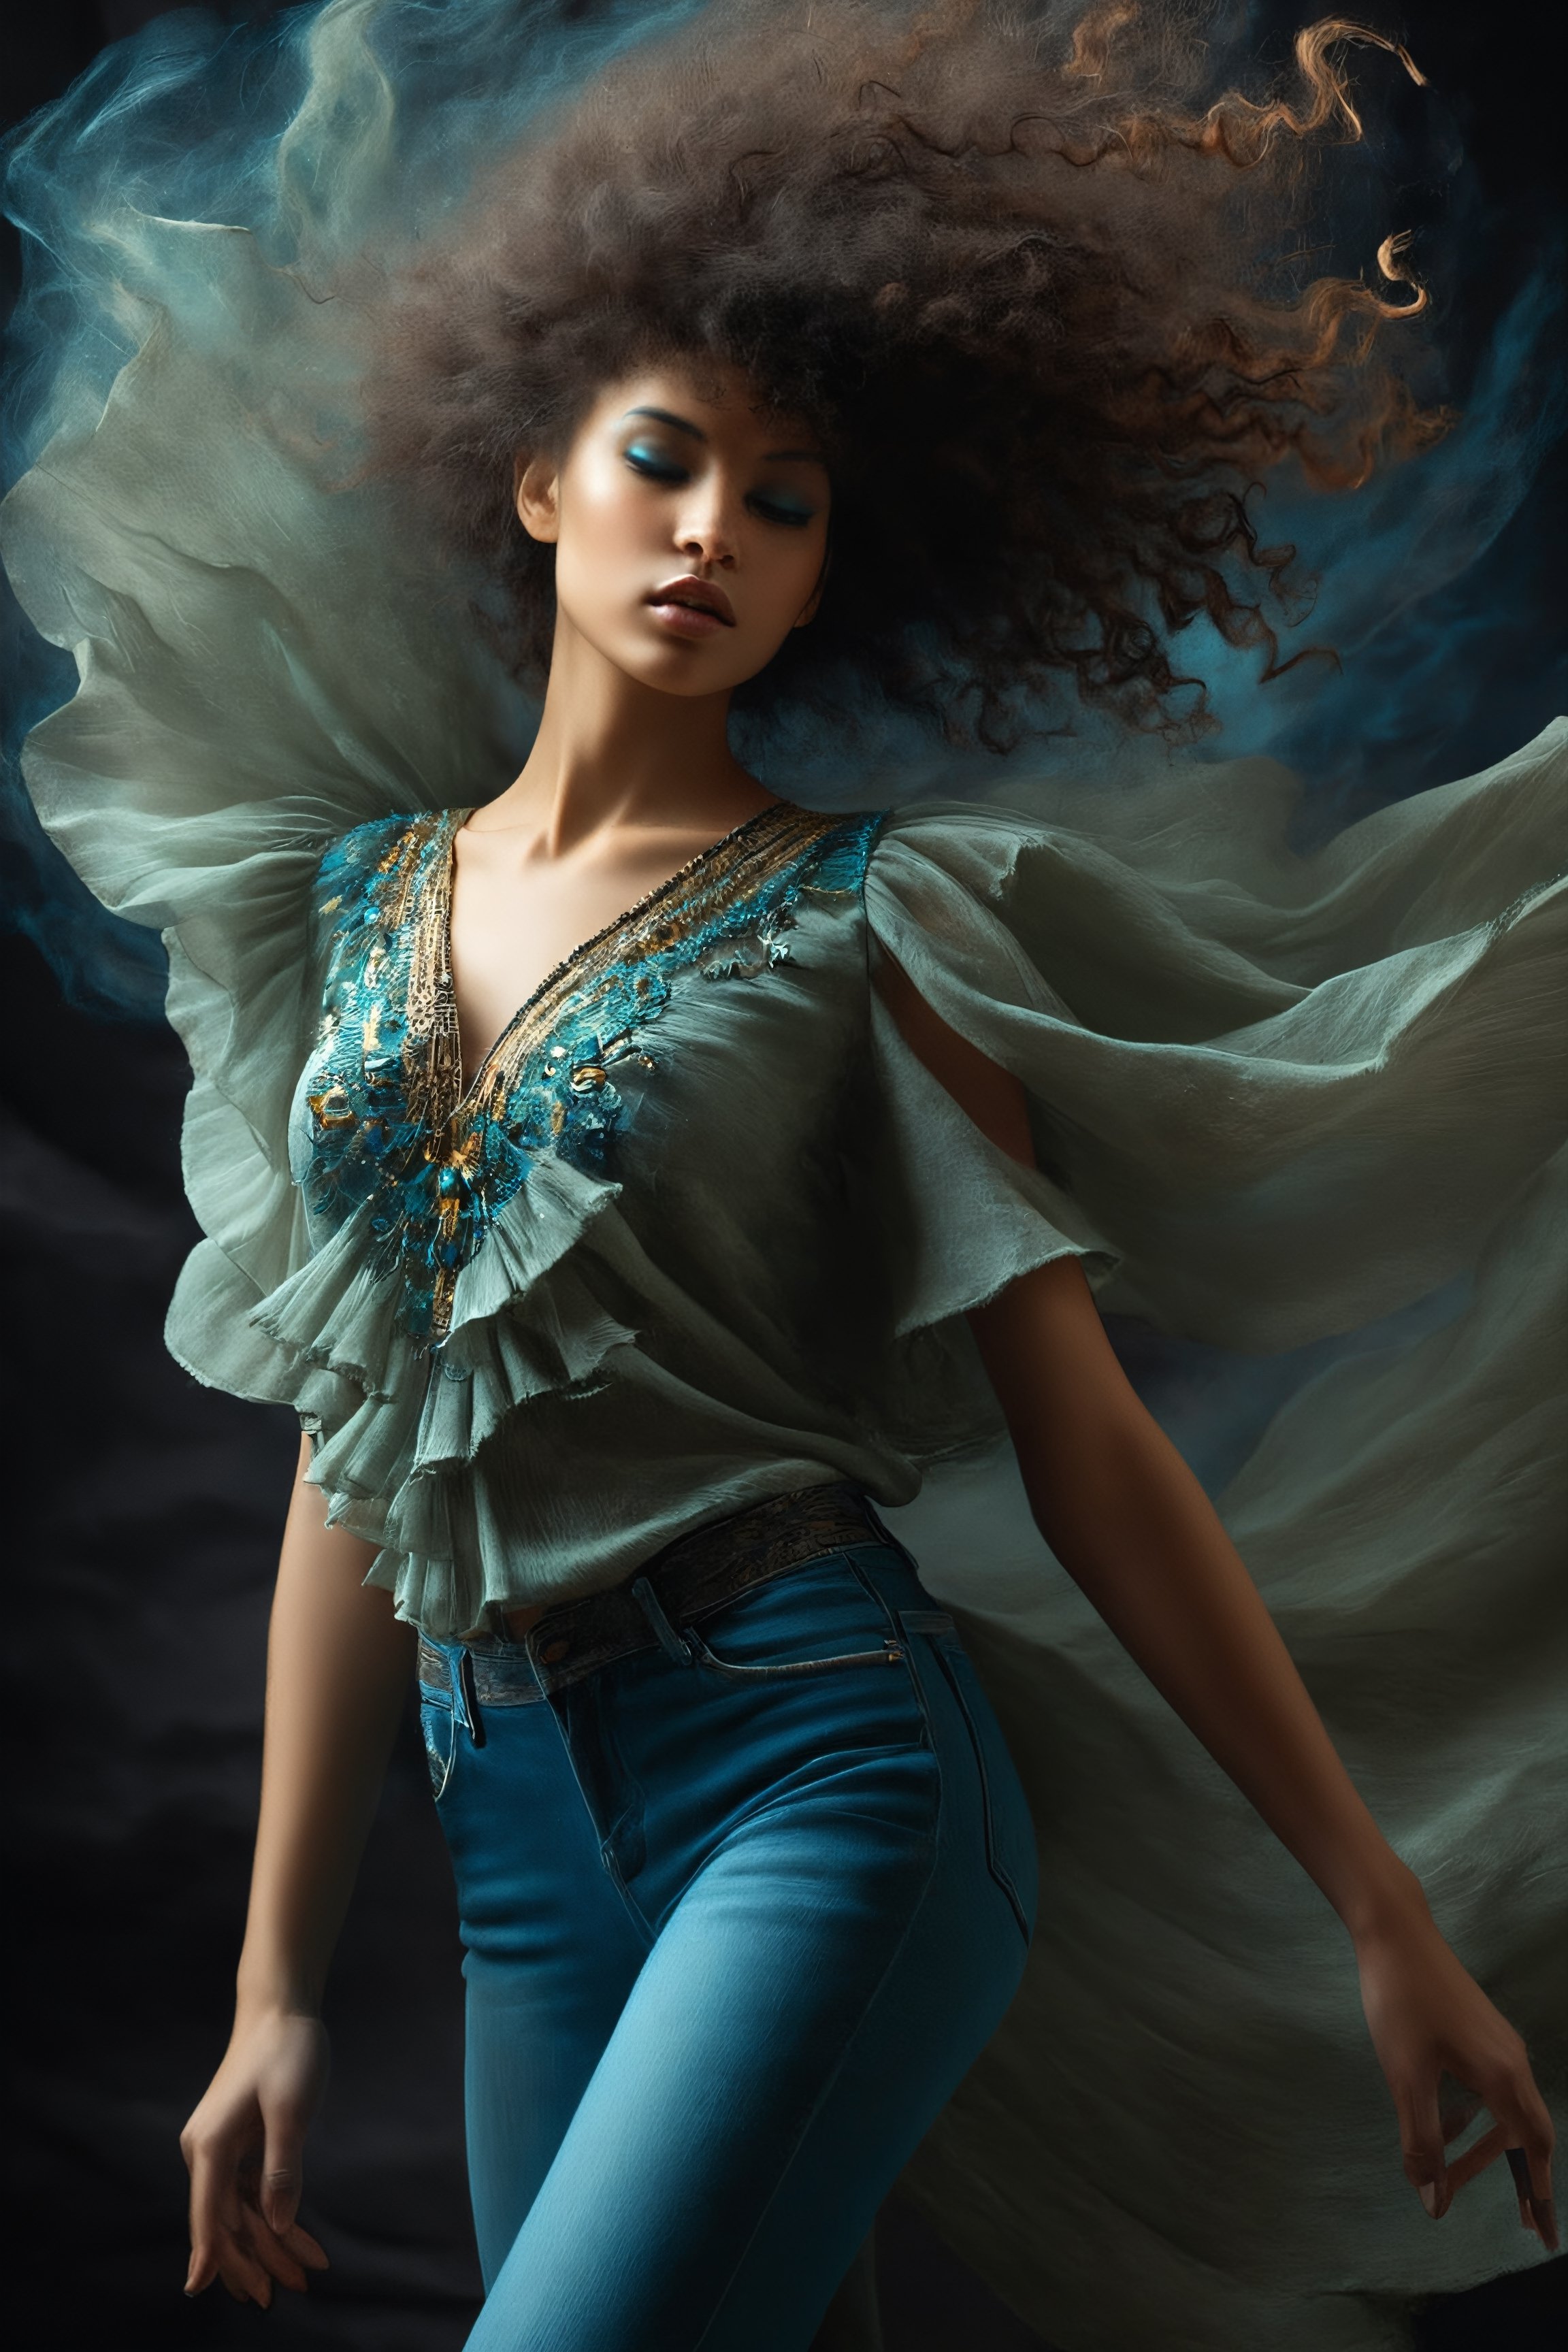 Macro, Surreal, ethereal, shot sleeve beautiful blouse and jeans, the Egyptian god Osirus, bold, layers of linen, old cardstock paper, dancing spirits, wind, Dramatic lighting,  detailed, rich deep colors, deep shadows
,DonM3l3m3nt4lXL,DissolveSdxl0